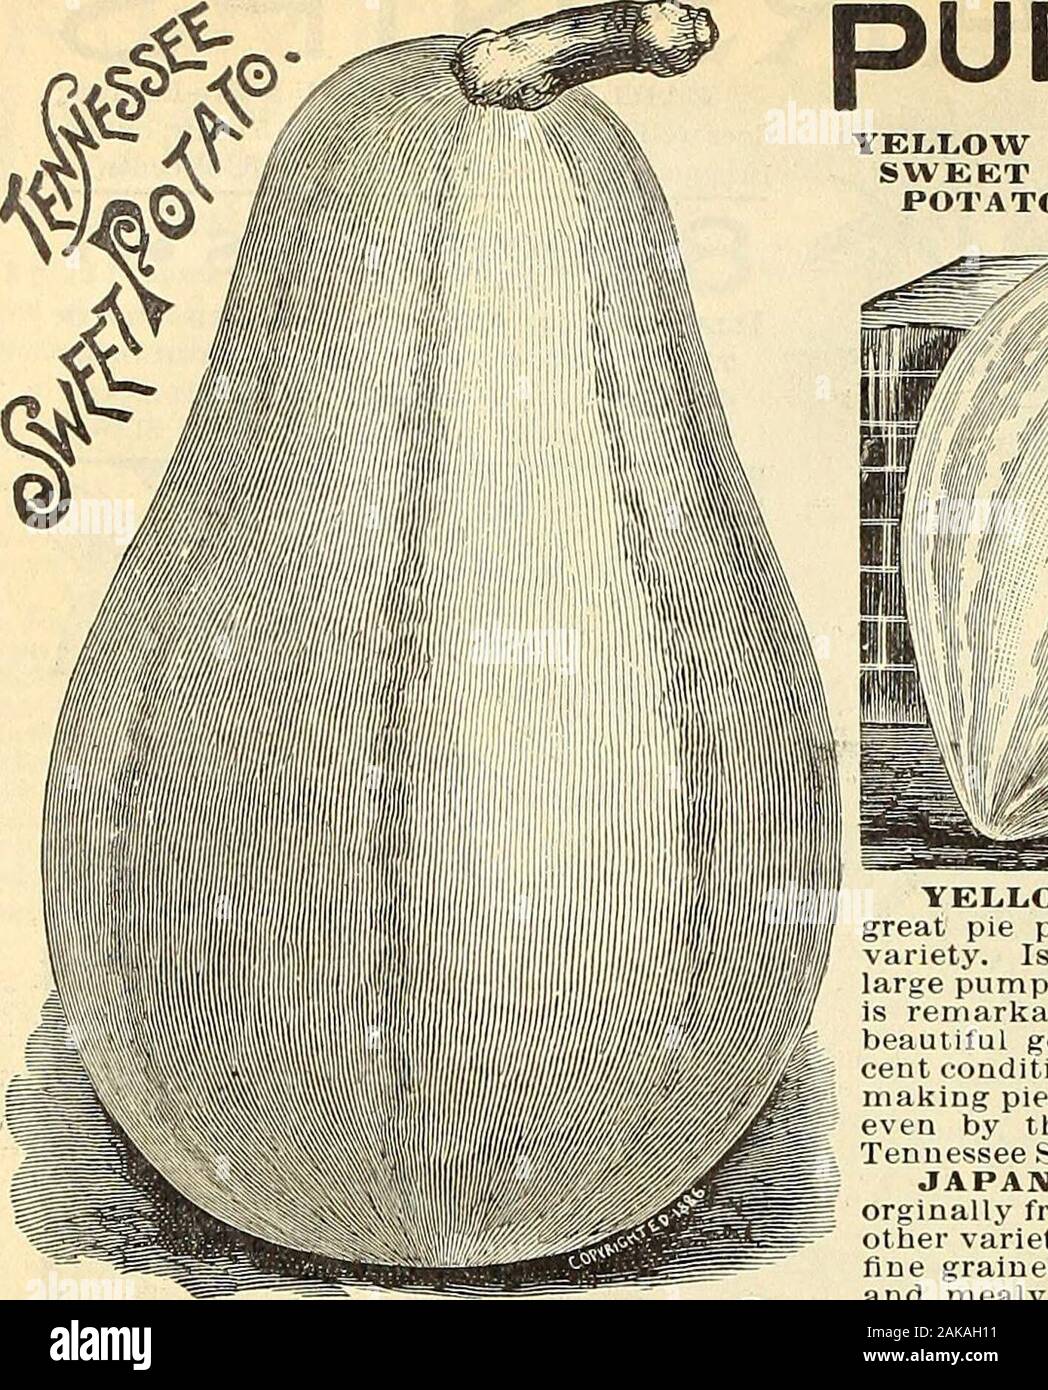 Maule's seed catalogue : 1896 . 151 Buys Sl.SCf^ 152 Buys S2.75M$3 Buys S4.25 m P{S»&gt;»i Most beautiful, splendid for CA Riiuc Q^ 7fl fe-^^-«K«lat)ledc,-omtion. More like^^ JS OO.^U ^- •? -^a crested fern. Packet, .=ic.; $5 BuVS 87.25)*=^ §10 Buys $15.00W ^g^i &lt;*»• ittbl, pai-sT^y FERN-LEA VF.D.- ™«», SEEDS Now, ?-t DOUBLE 4URLED. Pkt.,Scls. Idc; V, ll)..;!Oc.: lb.,yuc.DOUBLE CURLED. i? Packet, 5 cents; ounce, 10cts.; i4lb.,25cis.;lb.,65cts.PLAIN—The hardiest;excellent for liavor or sea-soning. Pkt., Sets.; oz., 10Cts.; ^ lb., 20 cts.; lb., 55cts. O F S E E D S IN PACKETS, Jlitiln., {MEA Stock Photo